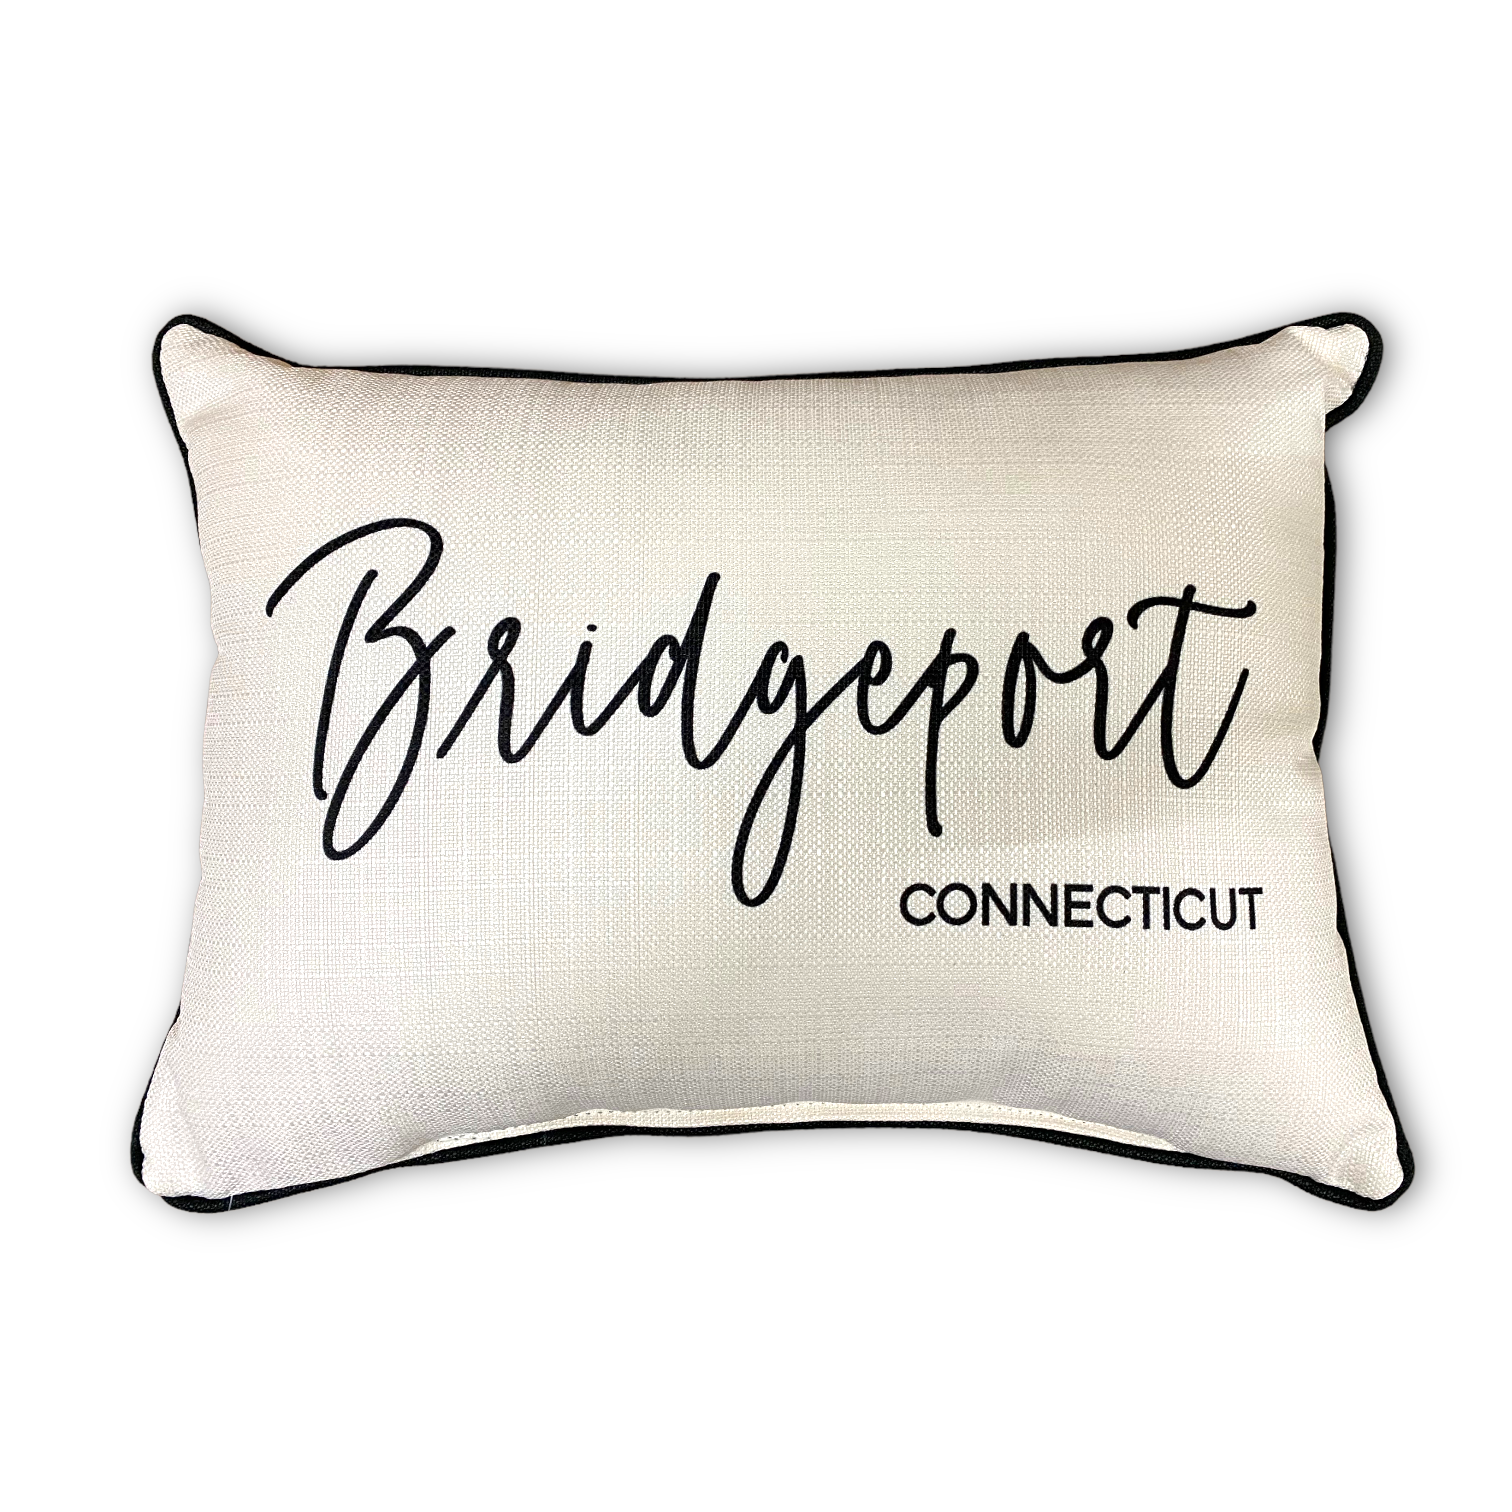 Bridgeport Connecticut Throw Pillow with Pinot Script and Black Piping - 19-in - Mellow Monkey